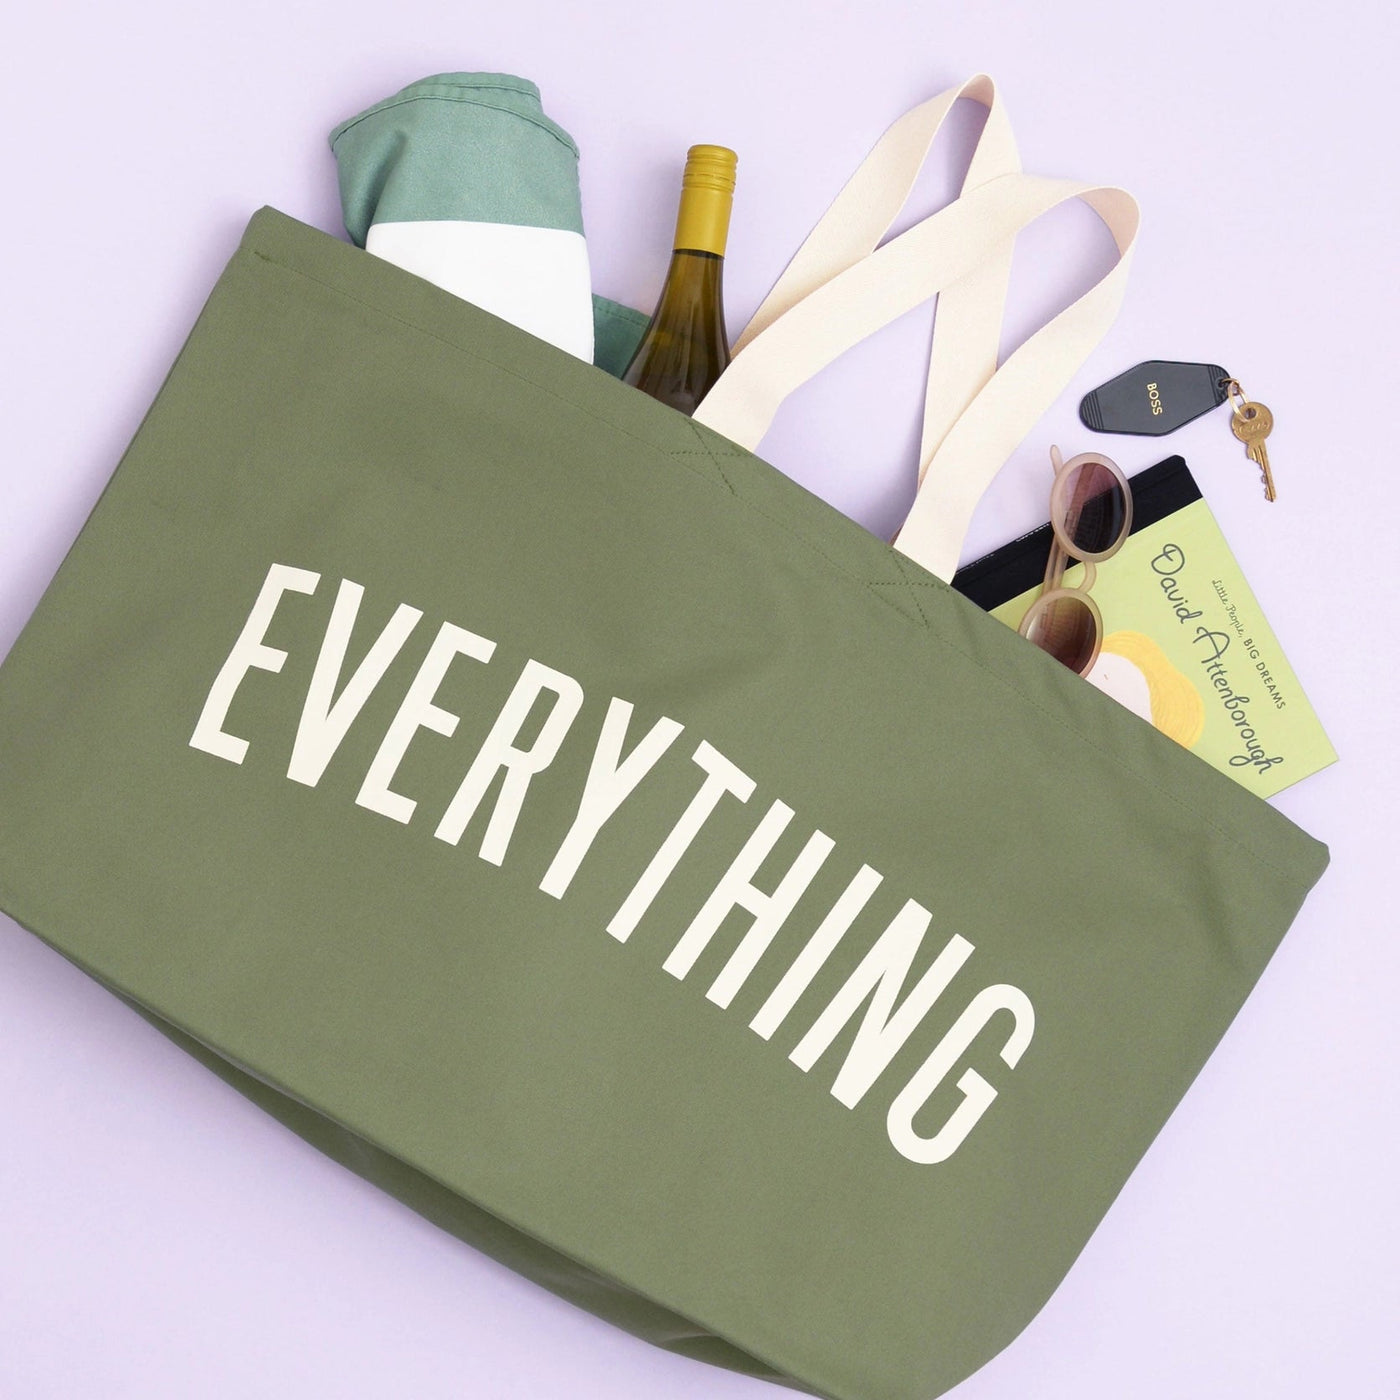 Everything - Olive REALLY Big Bag by Alphabet Bags - Petite Belle